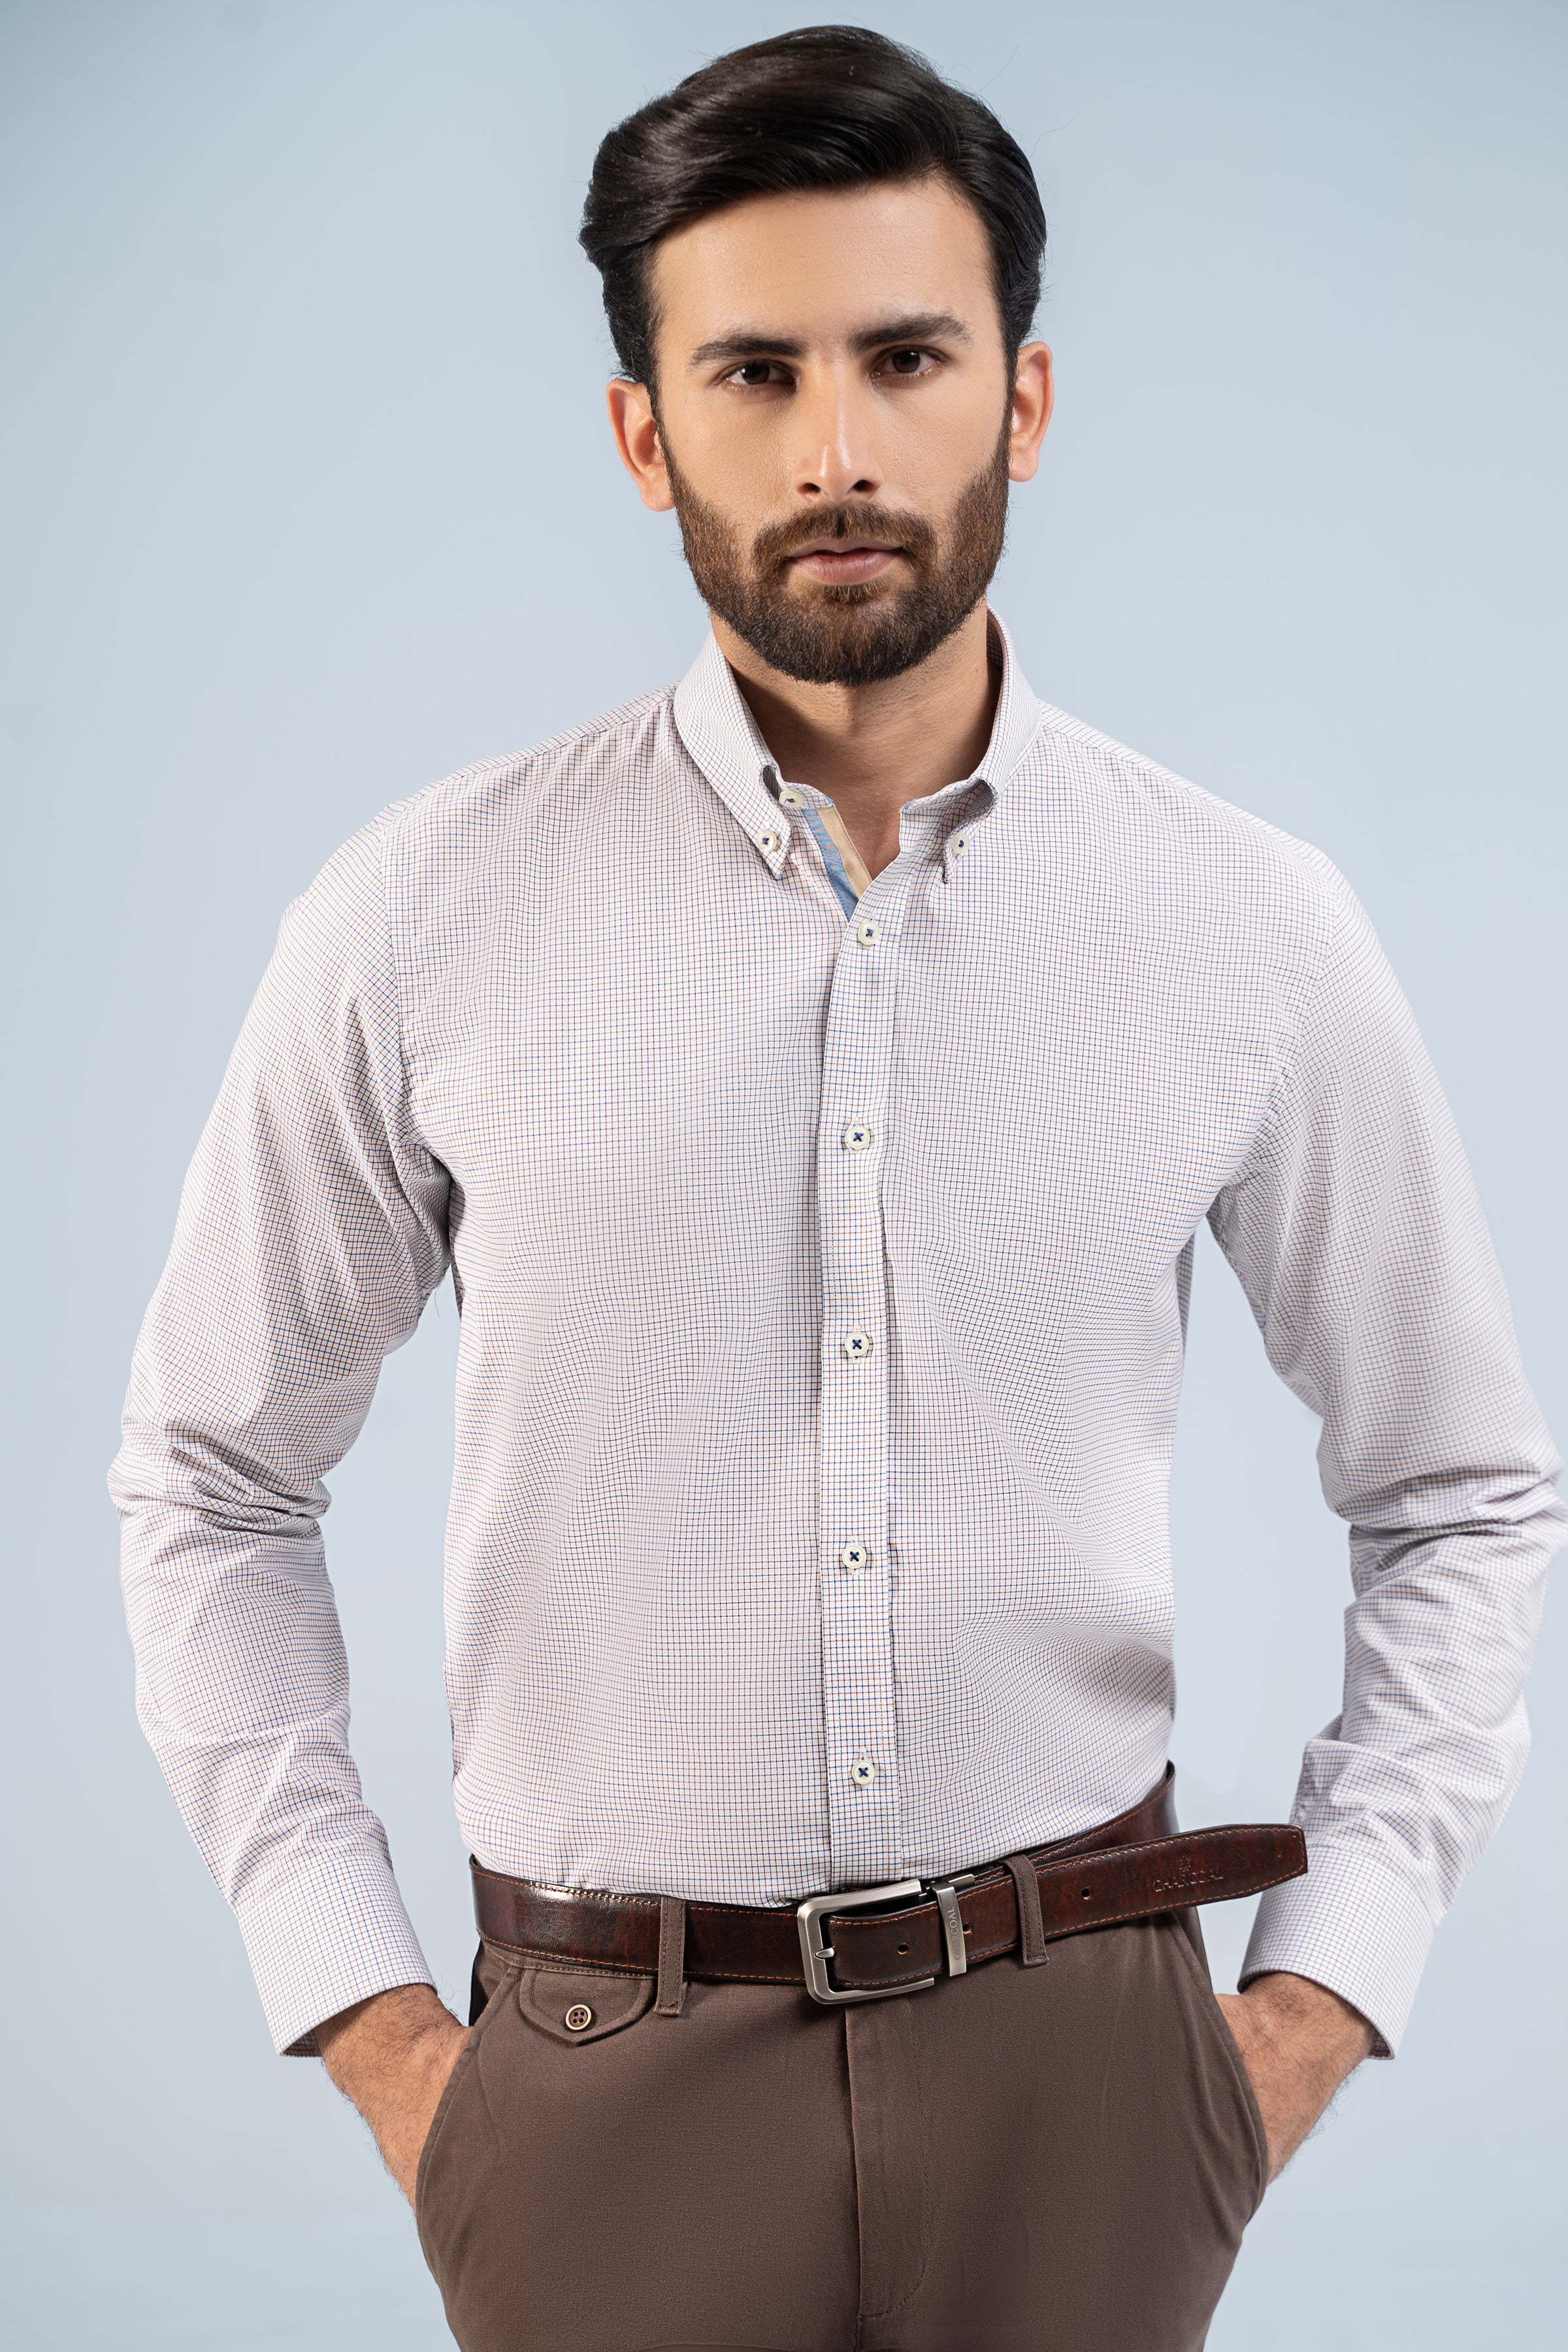 SEMI FORMAL SHIRTS OFF WHITE CHECK - Charcoal Clothing